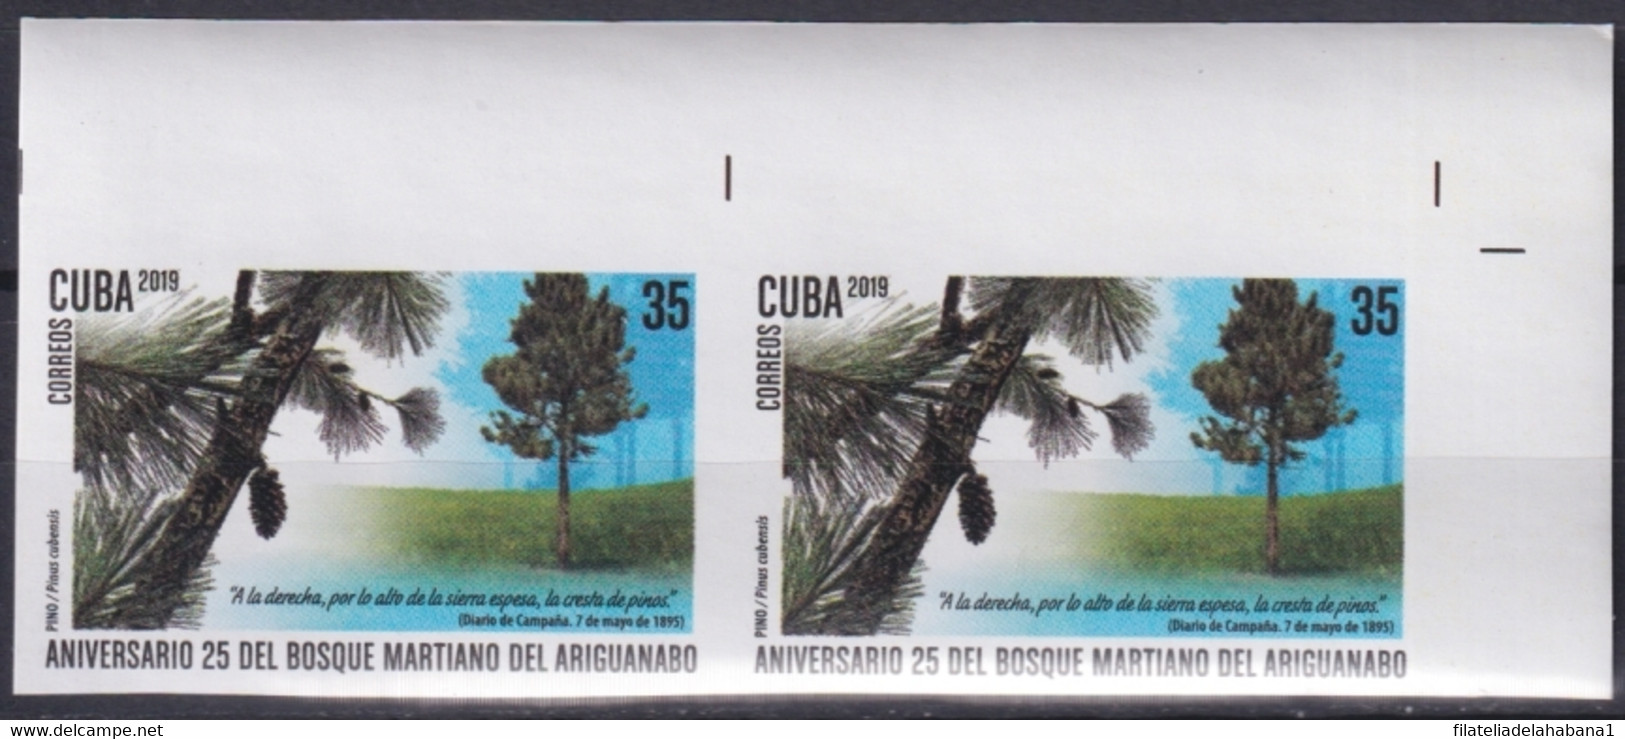 2019.205 CUBA MNH 2019 IMPERFORATED PROOF 35c MARTI TREE ARIGUANABO PINOS PINE. - Imperforates, Proofs & Errors